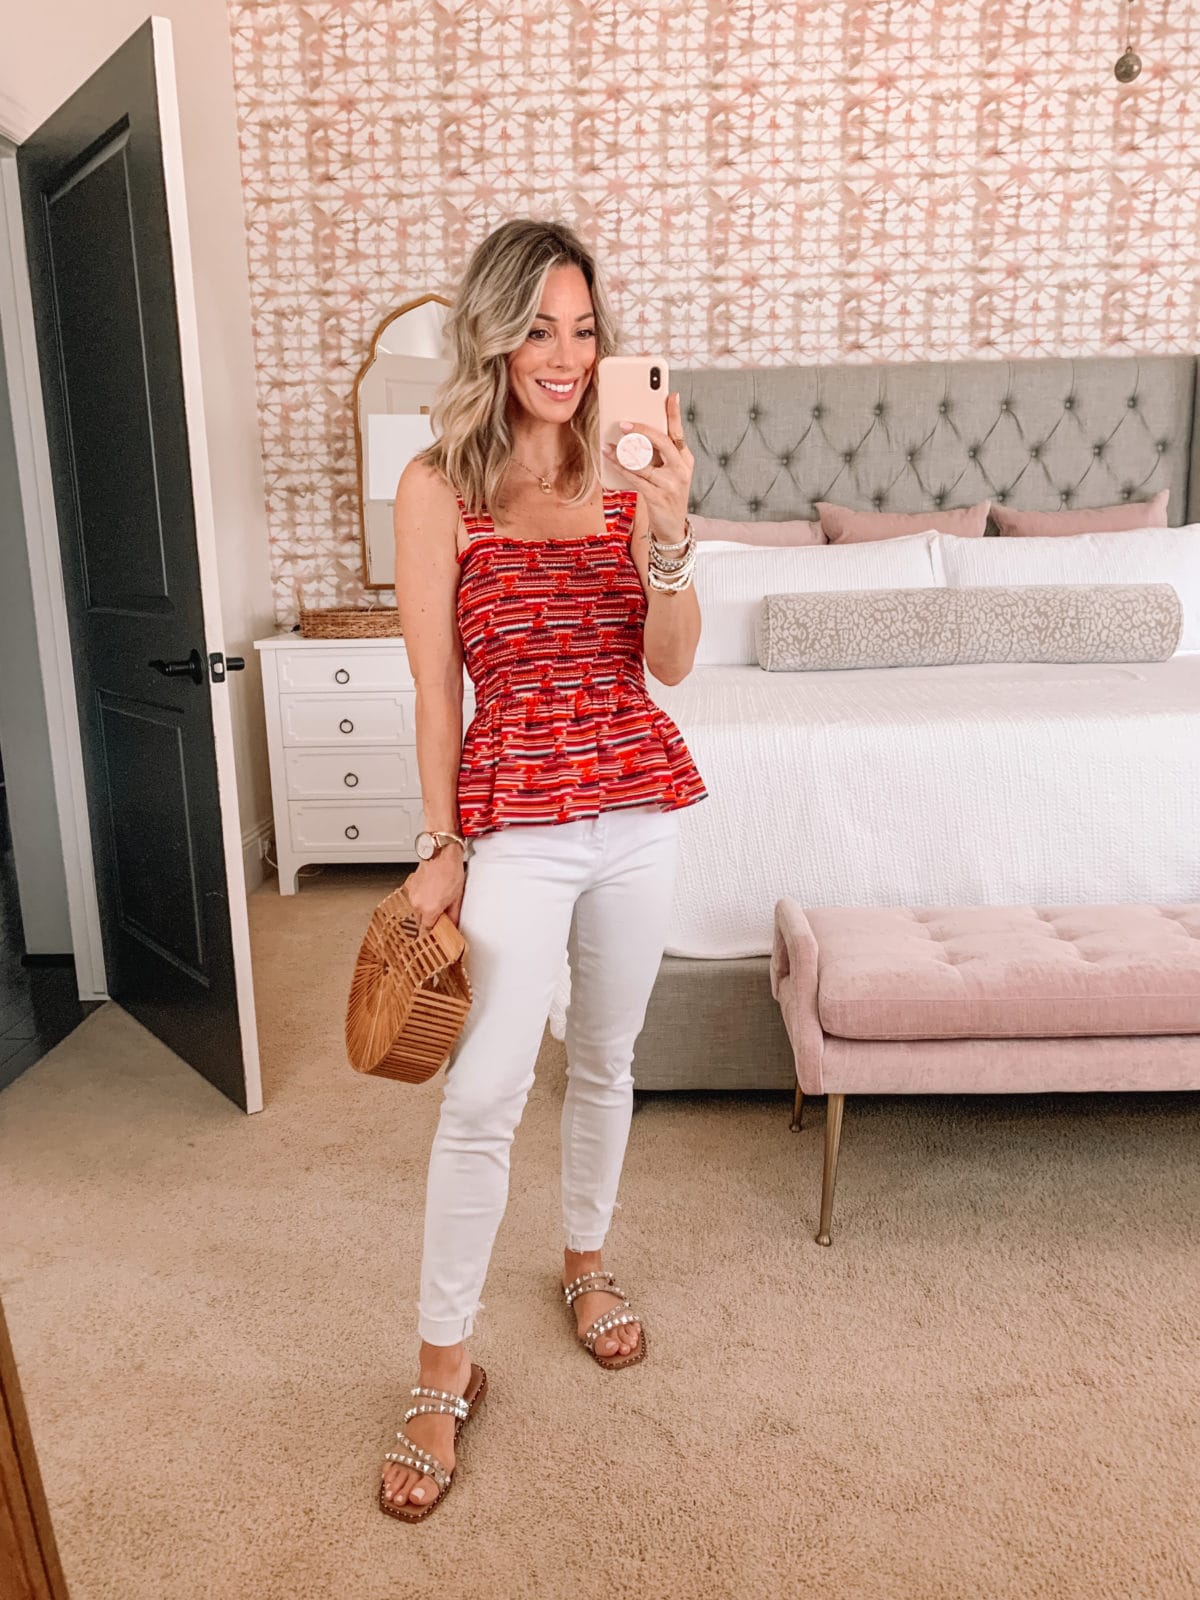 Dressing Room Finds, Peplum Top and White Jeans with Studded Sandals 